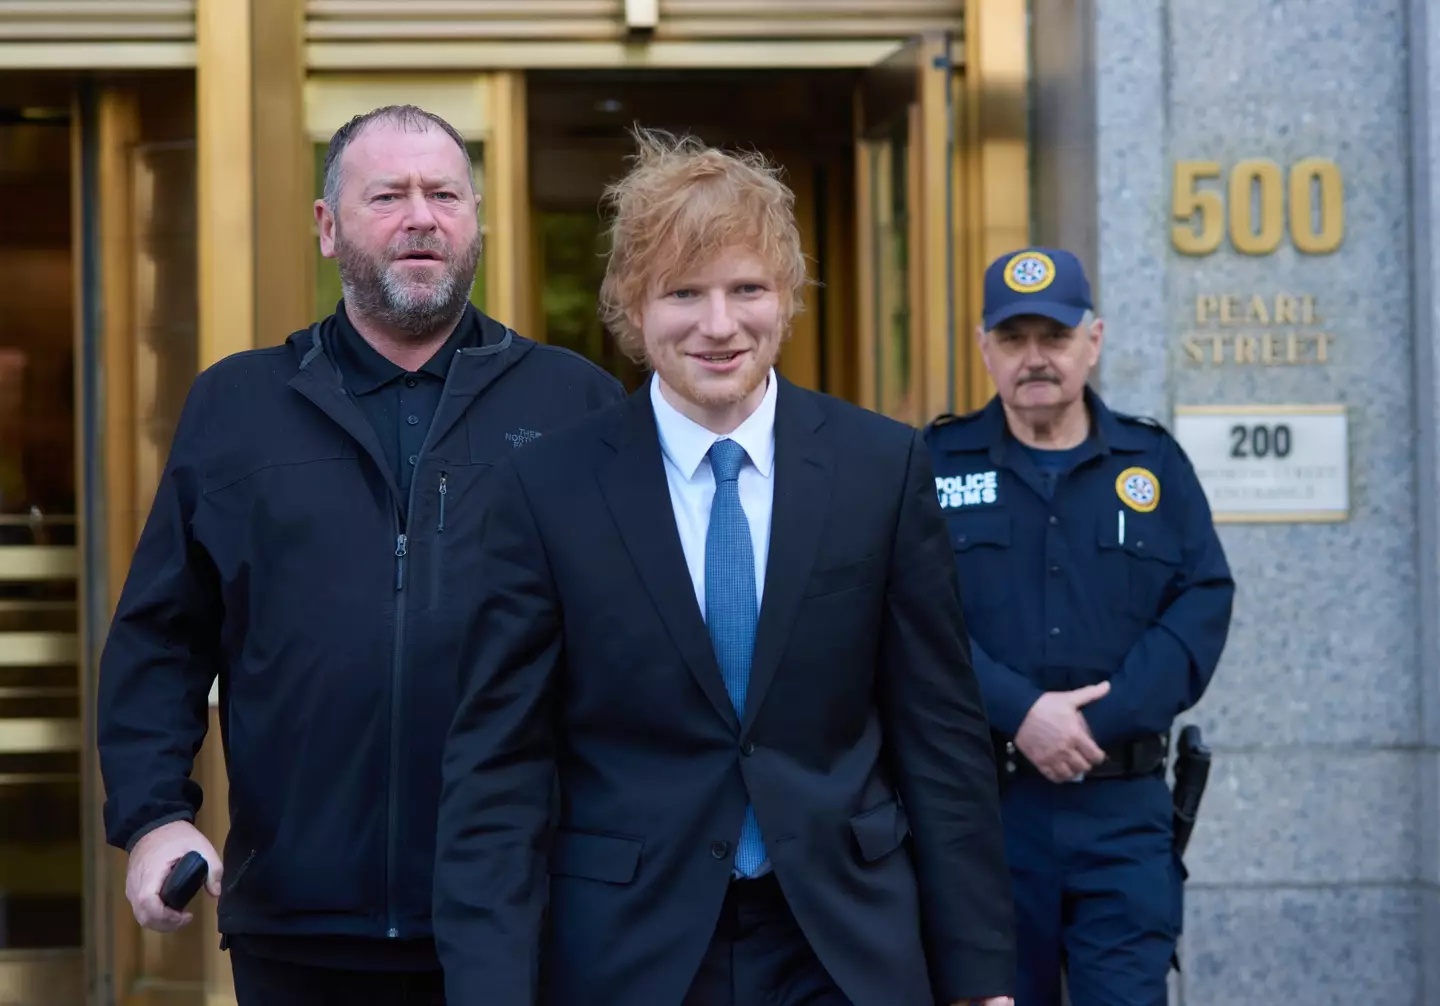 Ed Sheeran's lawyer says the case should 'never have been brought' to court.